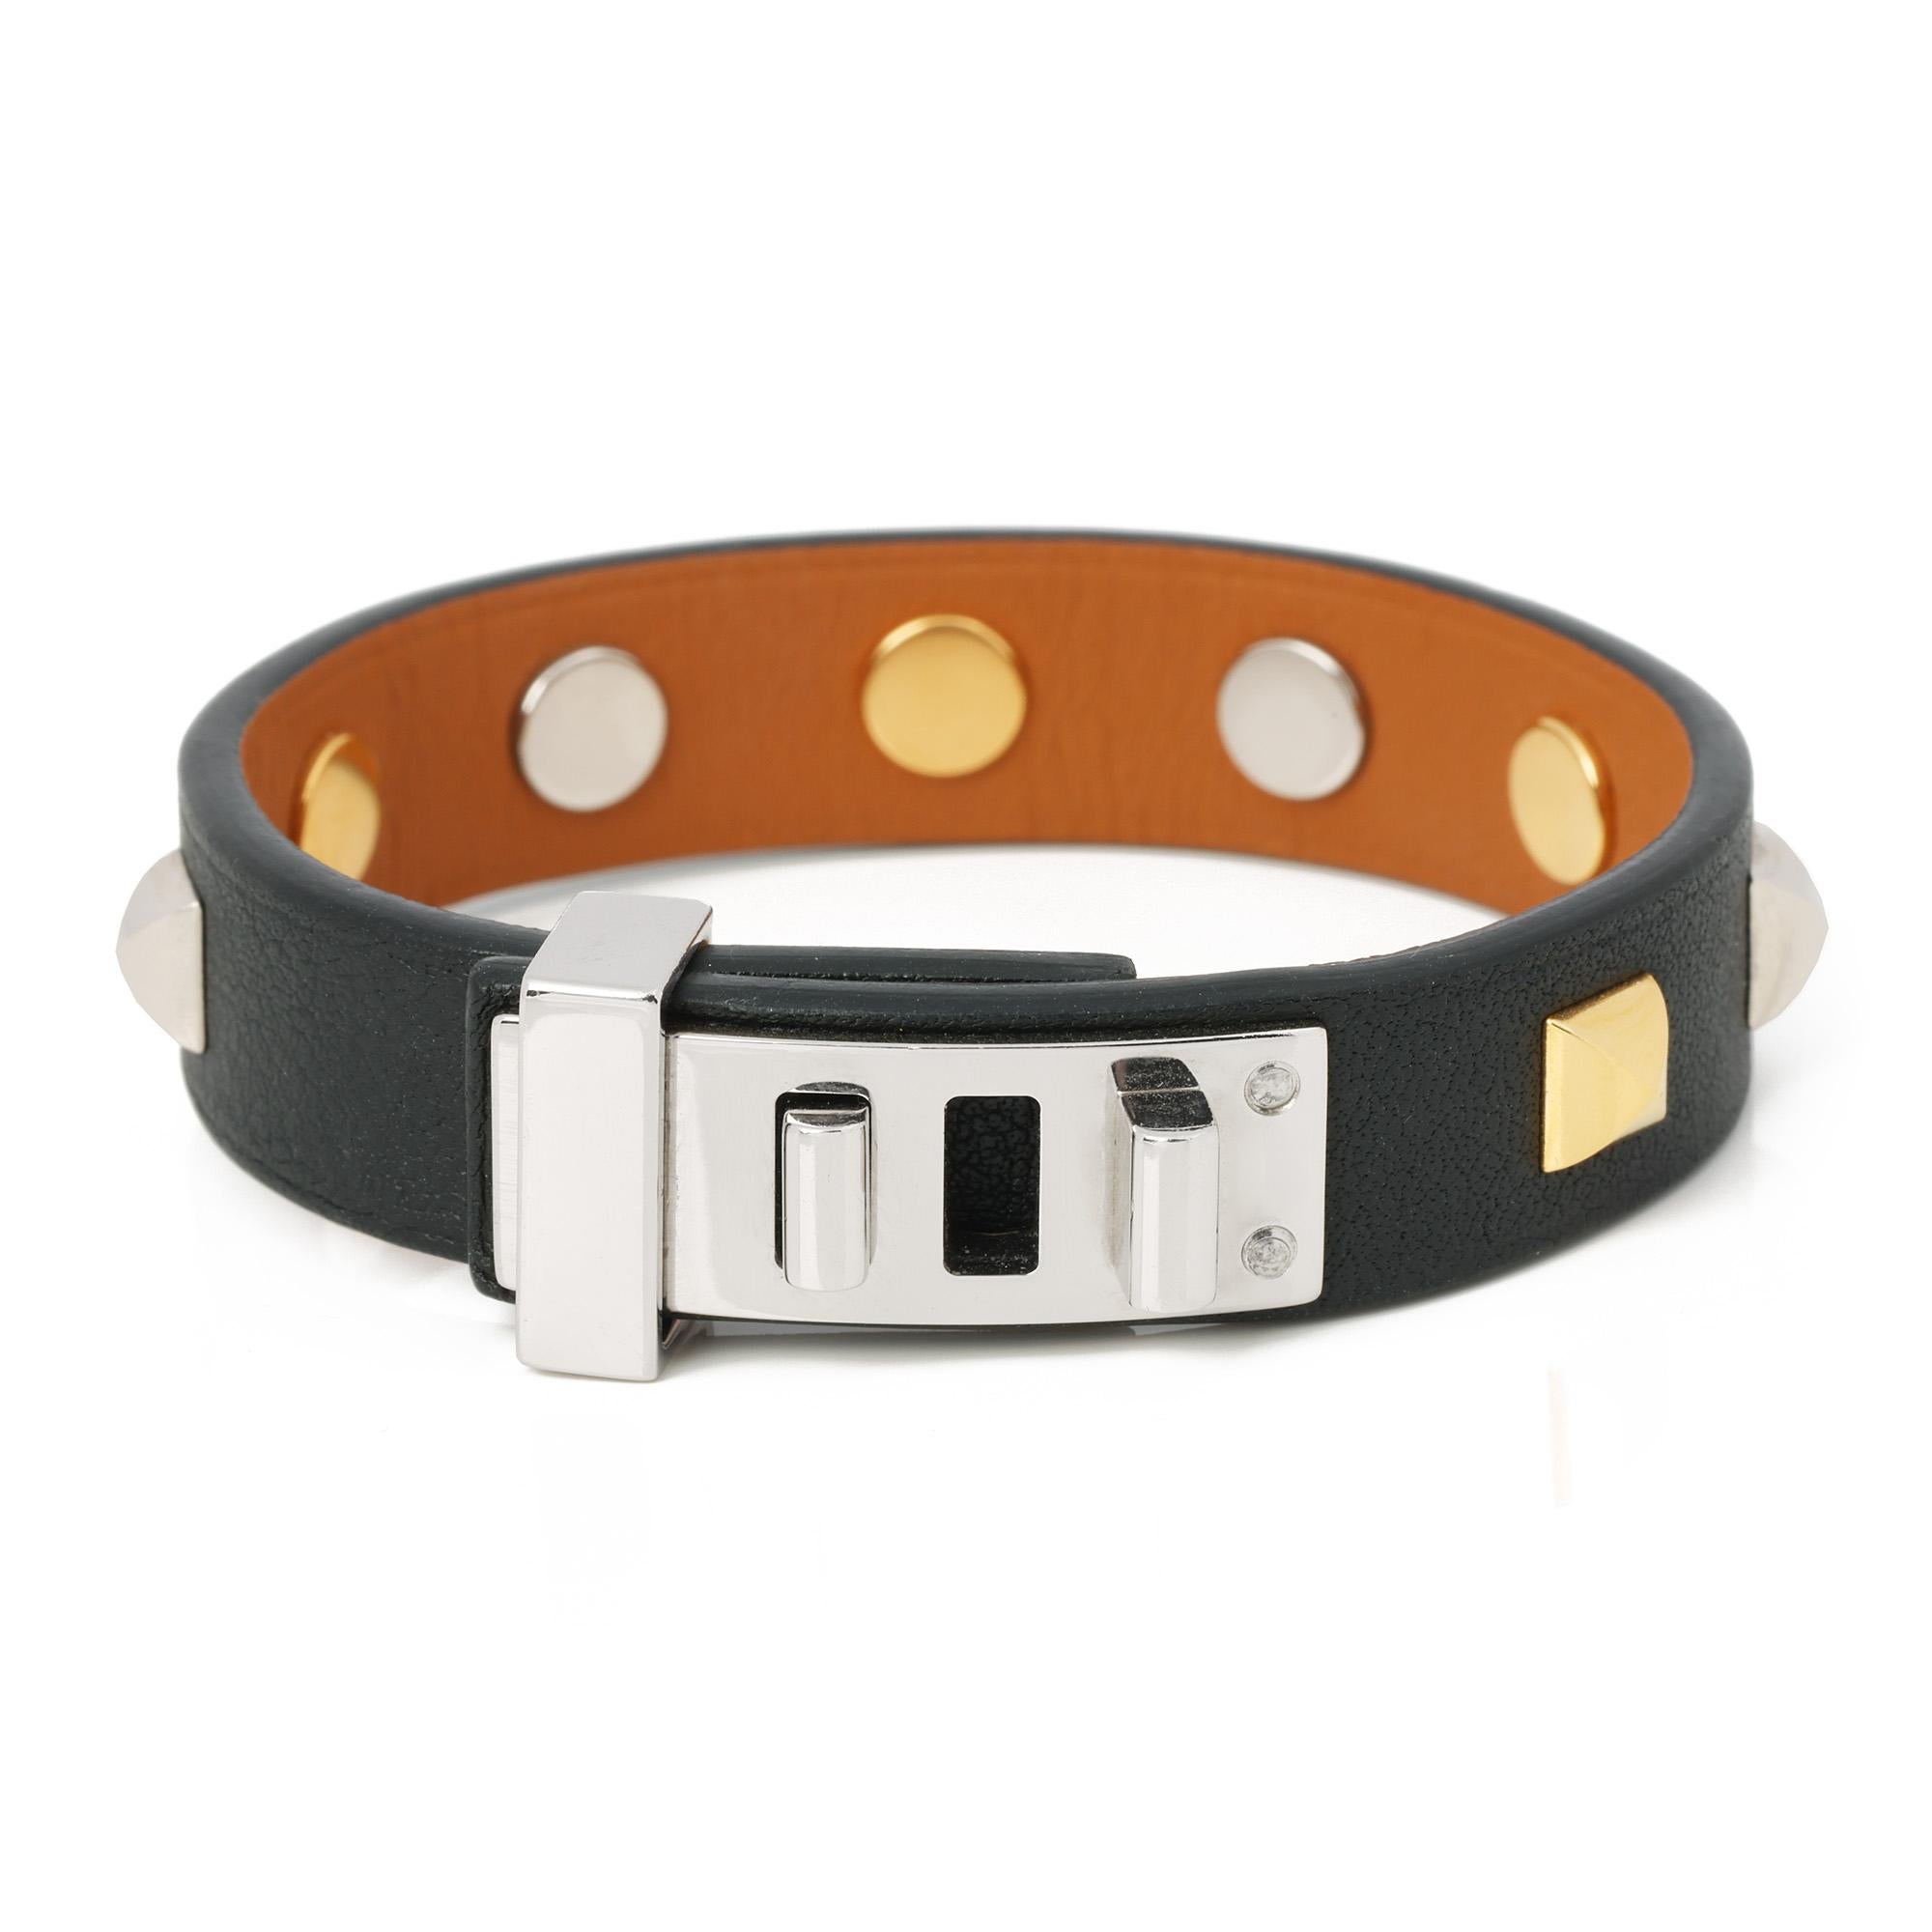 Hermès MINI DOG CLOUS CARRES BRACELET

ITEM CONDITION	Excellent
XUPES REFERENCE	AAJ013
MANUFACTURER	Hermès
ACCOMPANIED BY	Hermes pouch and box
BRACELET WIDTH	12mm
BRACELET LENGTH	max 14.5cm internal circumference
TOTAL WEIGHT	14g